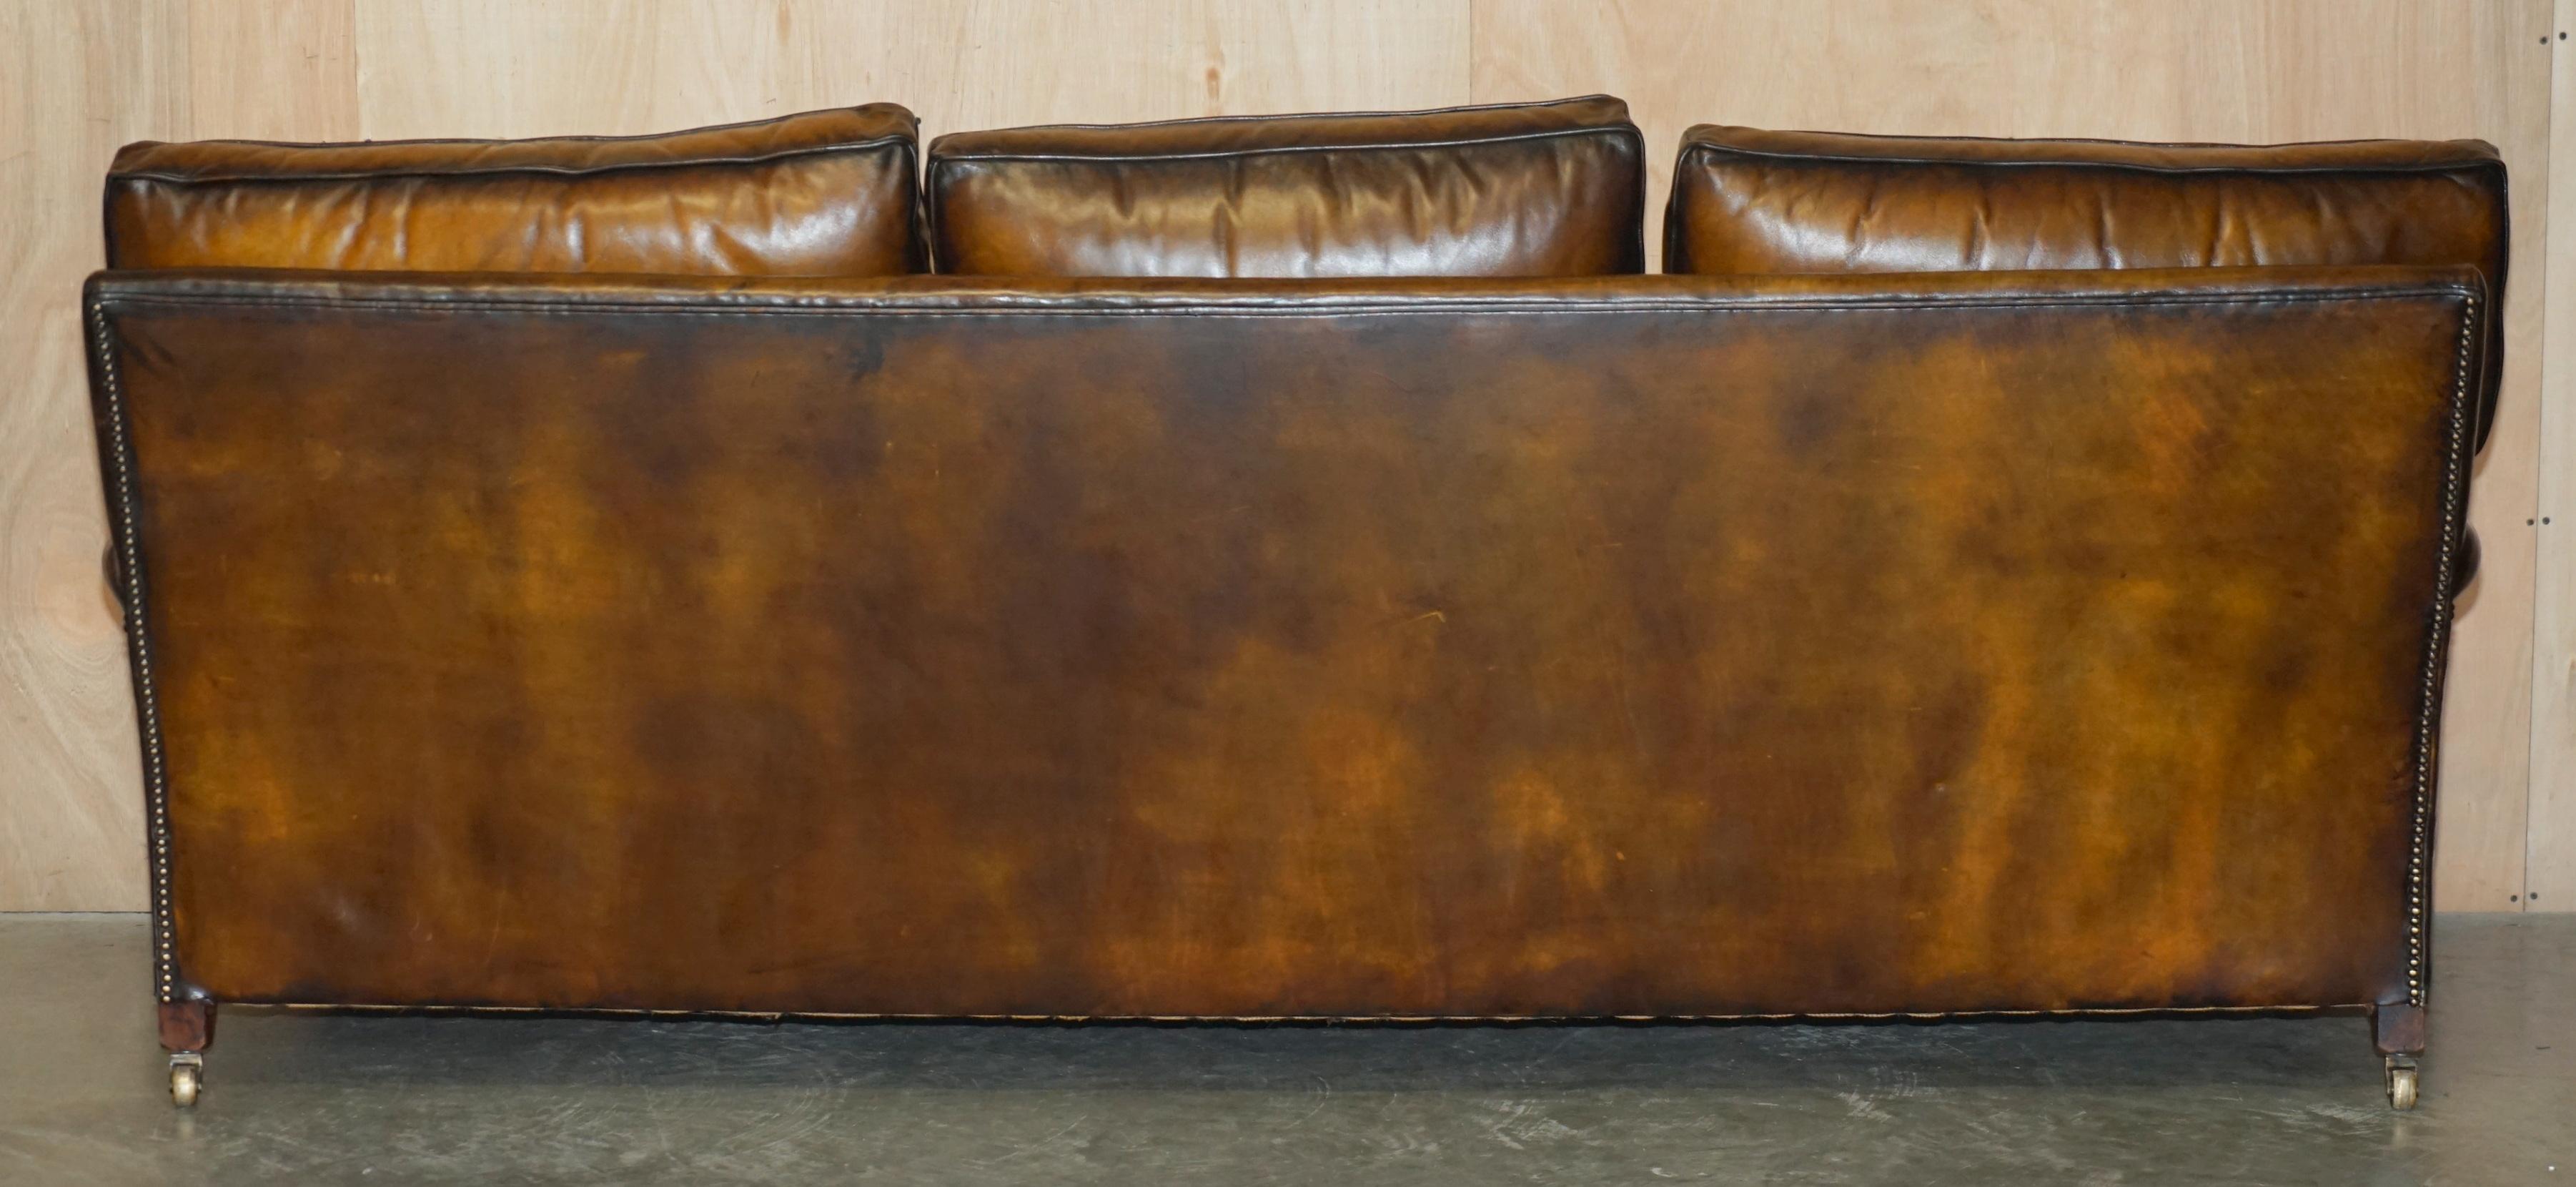 GEORGE SMITH RESTORED HOWARD & SON'S BROWN LEATHER SCROLL ARM SOFA en vente 12